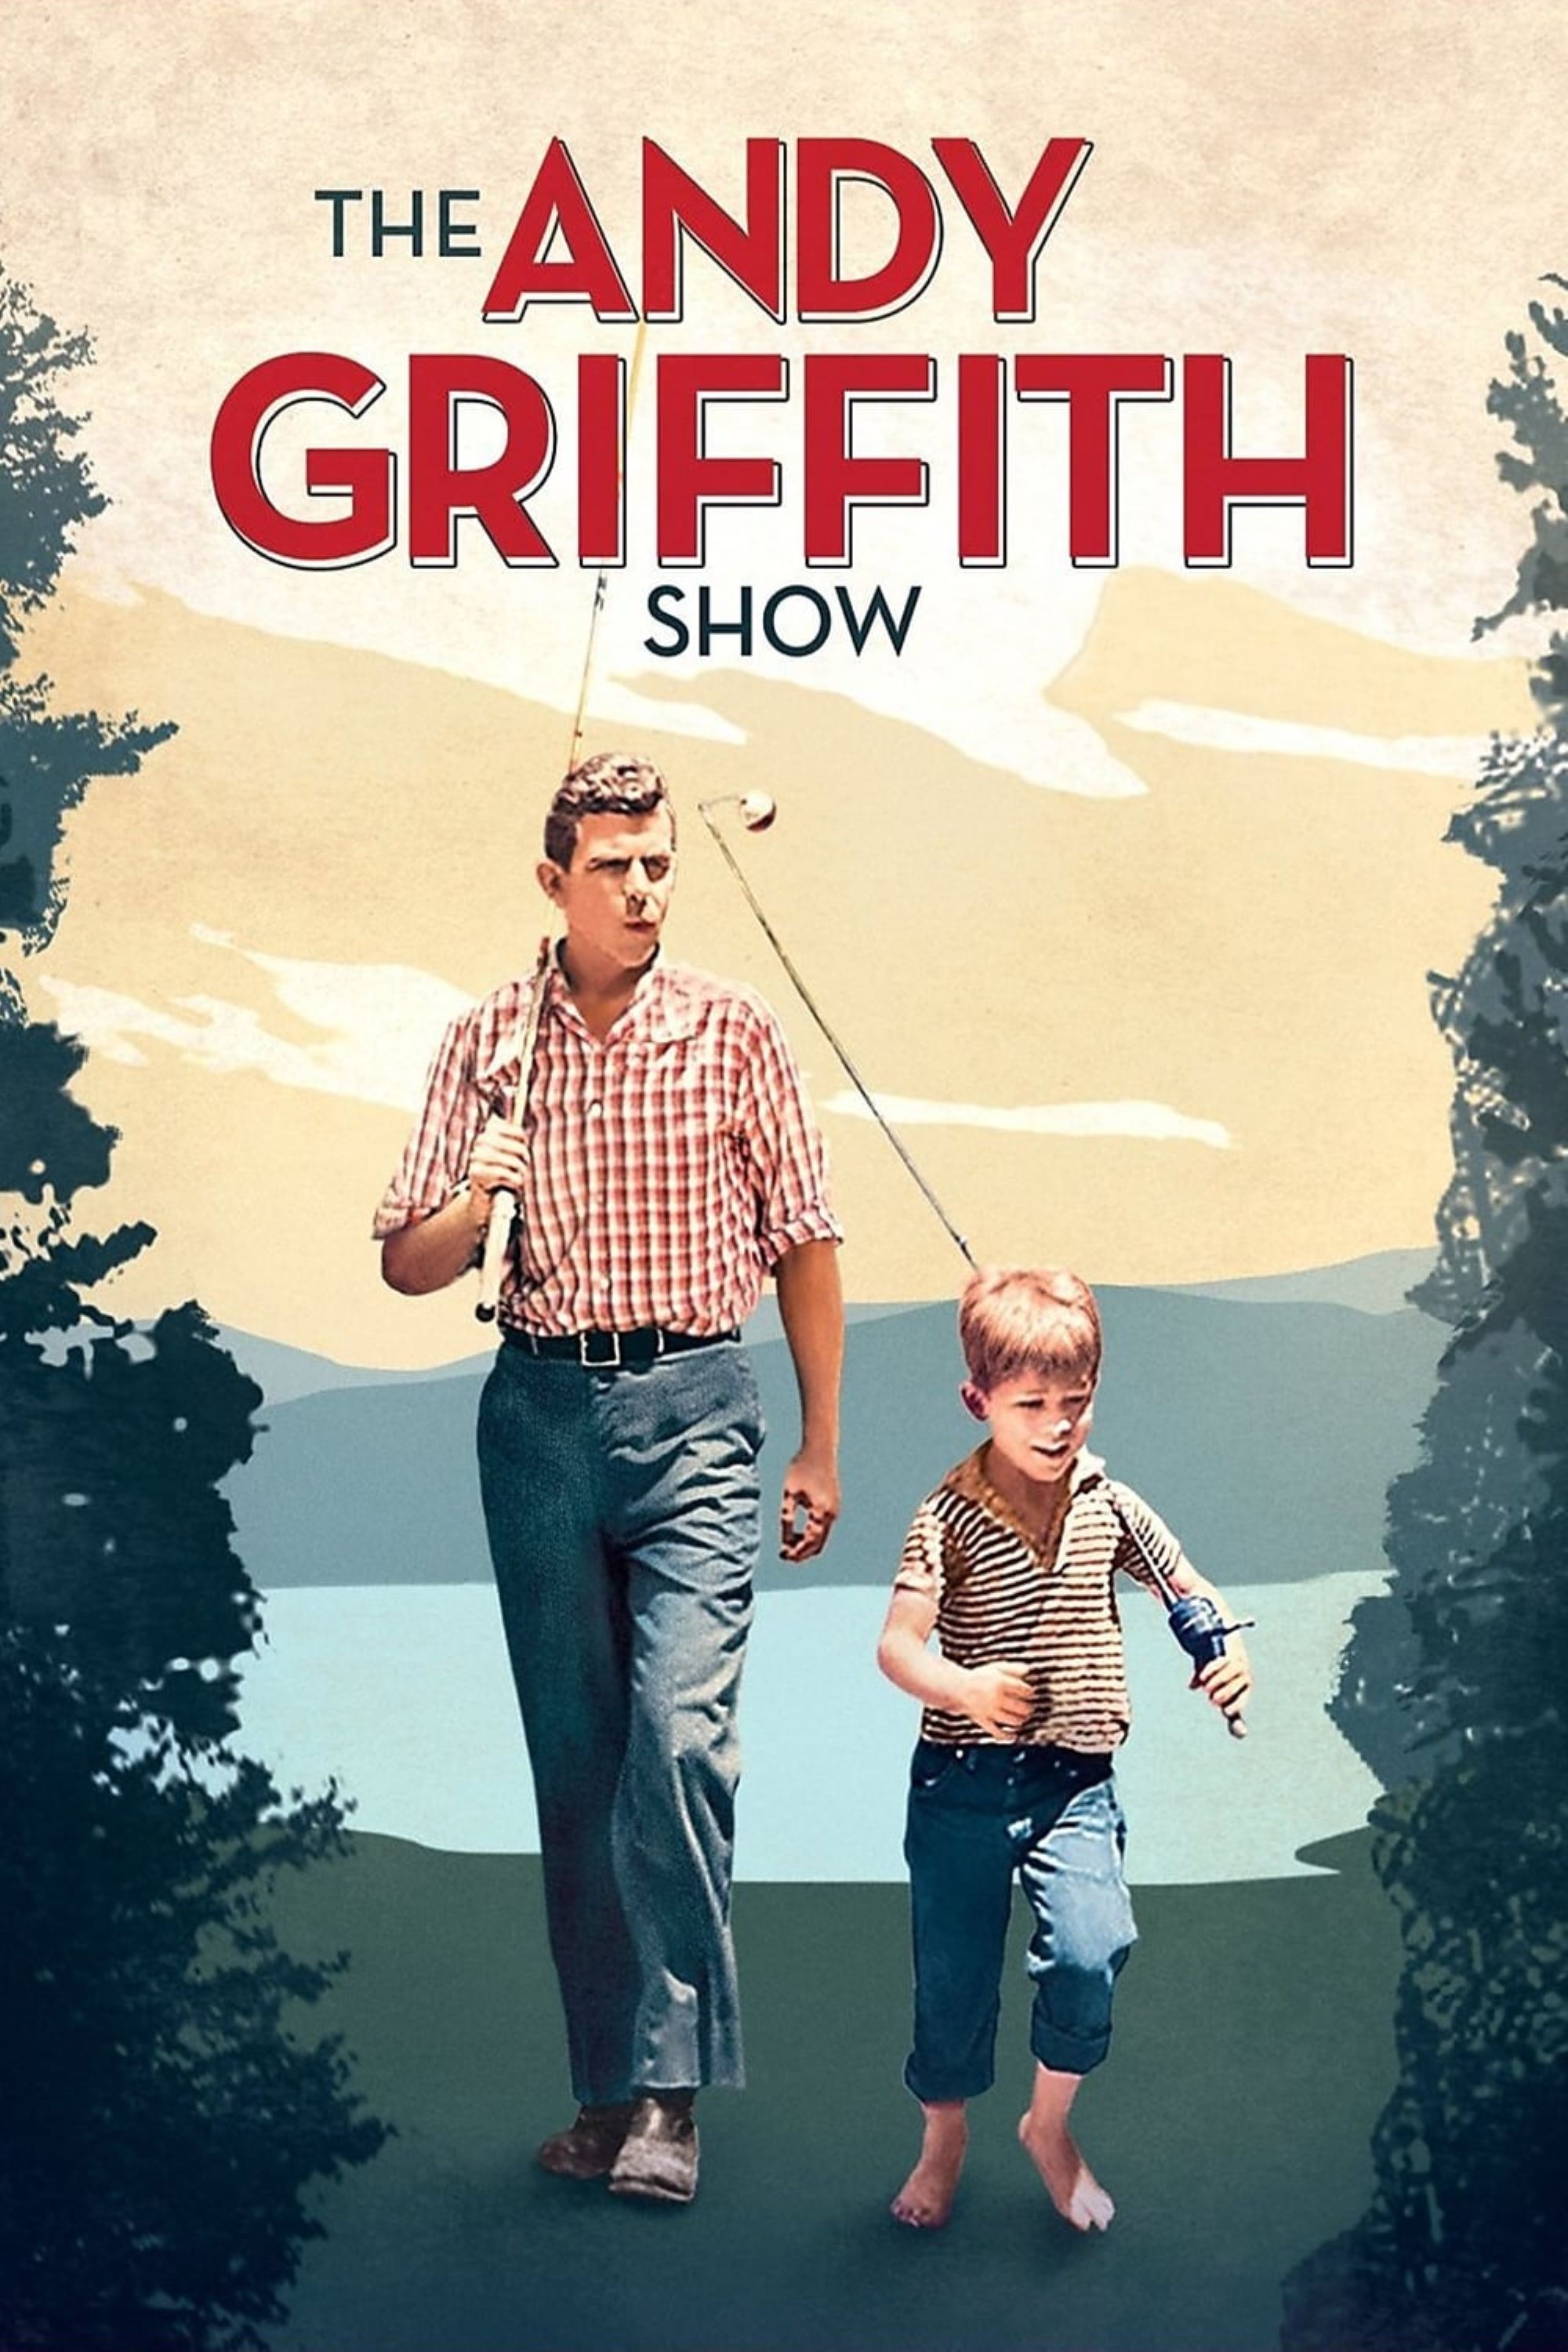 The Andy Griffith Show - Where to Watch and Stream - TV Guide